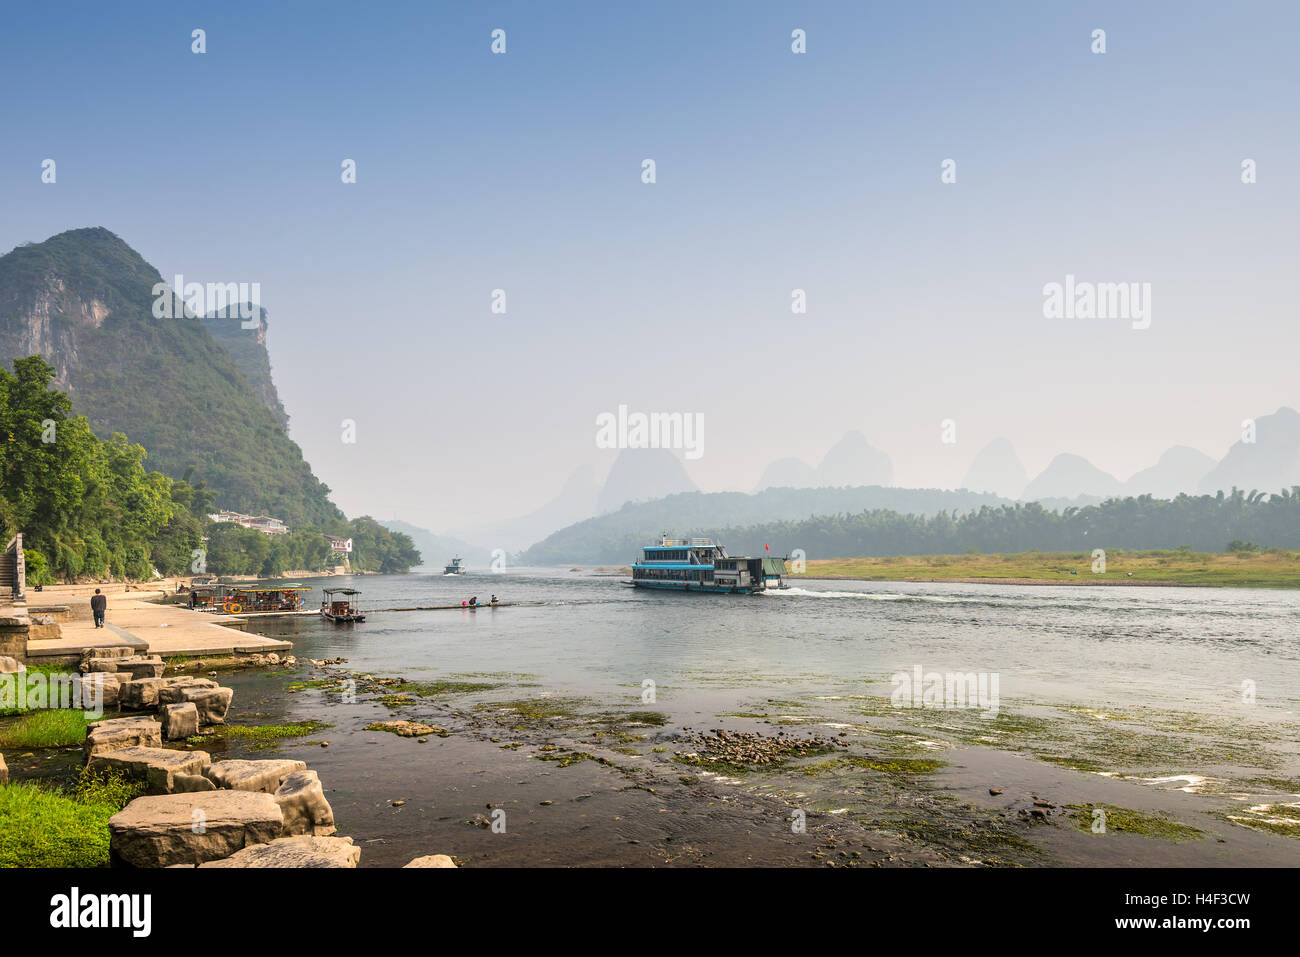 Pier for boats in the tourist town Yangshuo on the banks of Li river in China Stock Photo